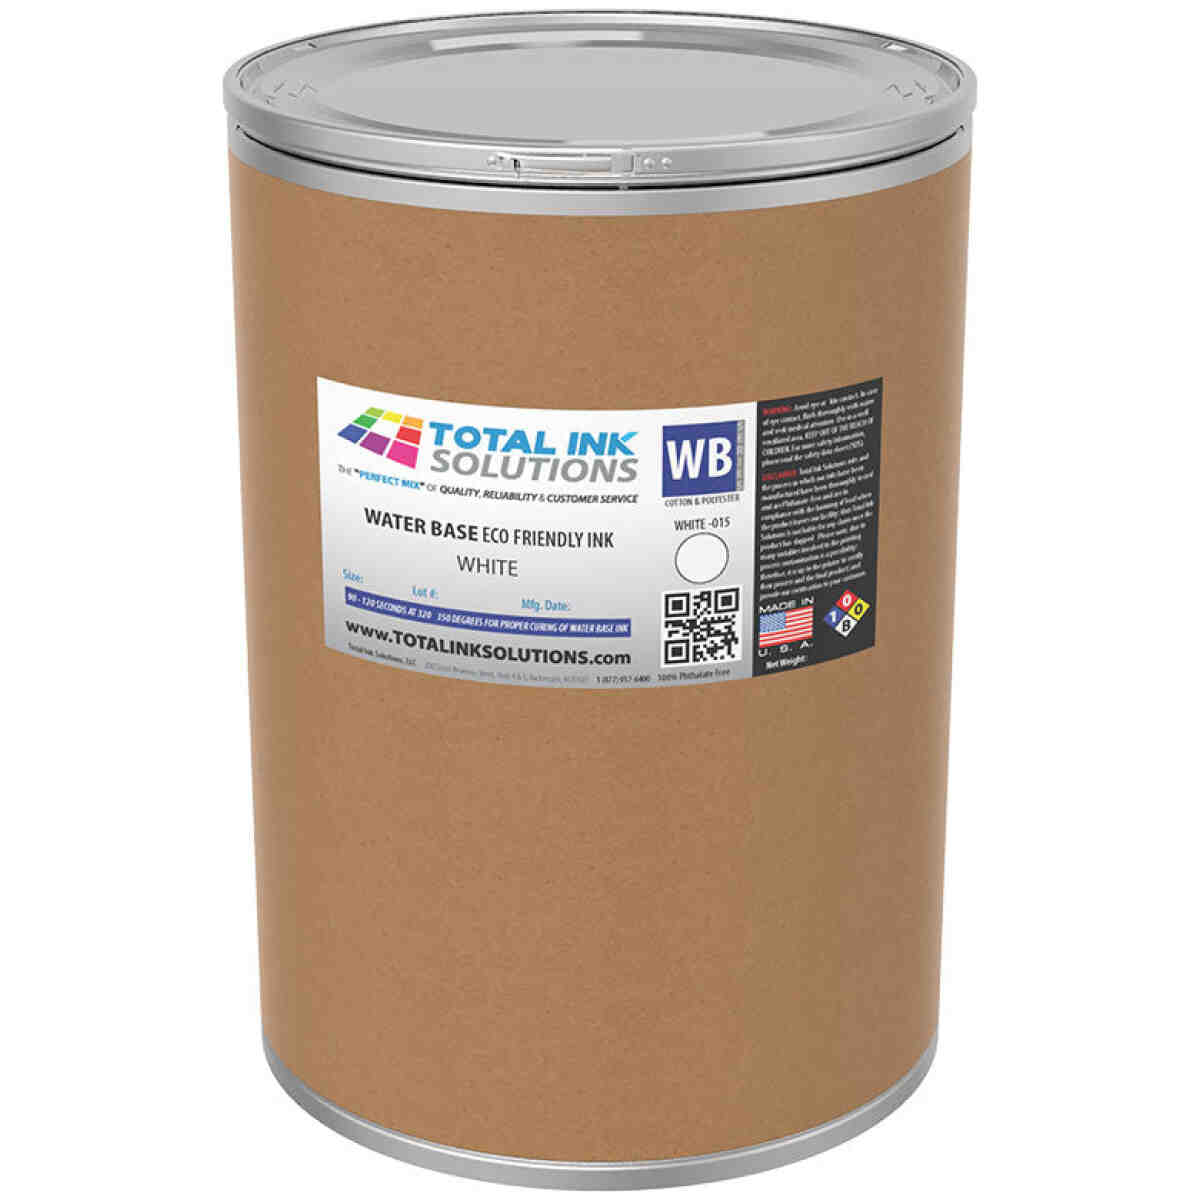 Waterbase Textile Ink - White - 30 Gallons TOTAL INK SOLUTIONS®